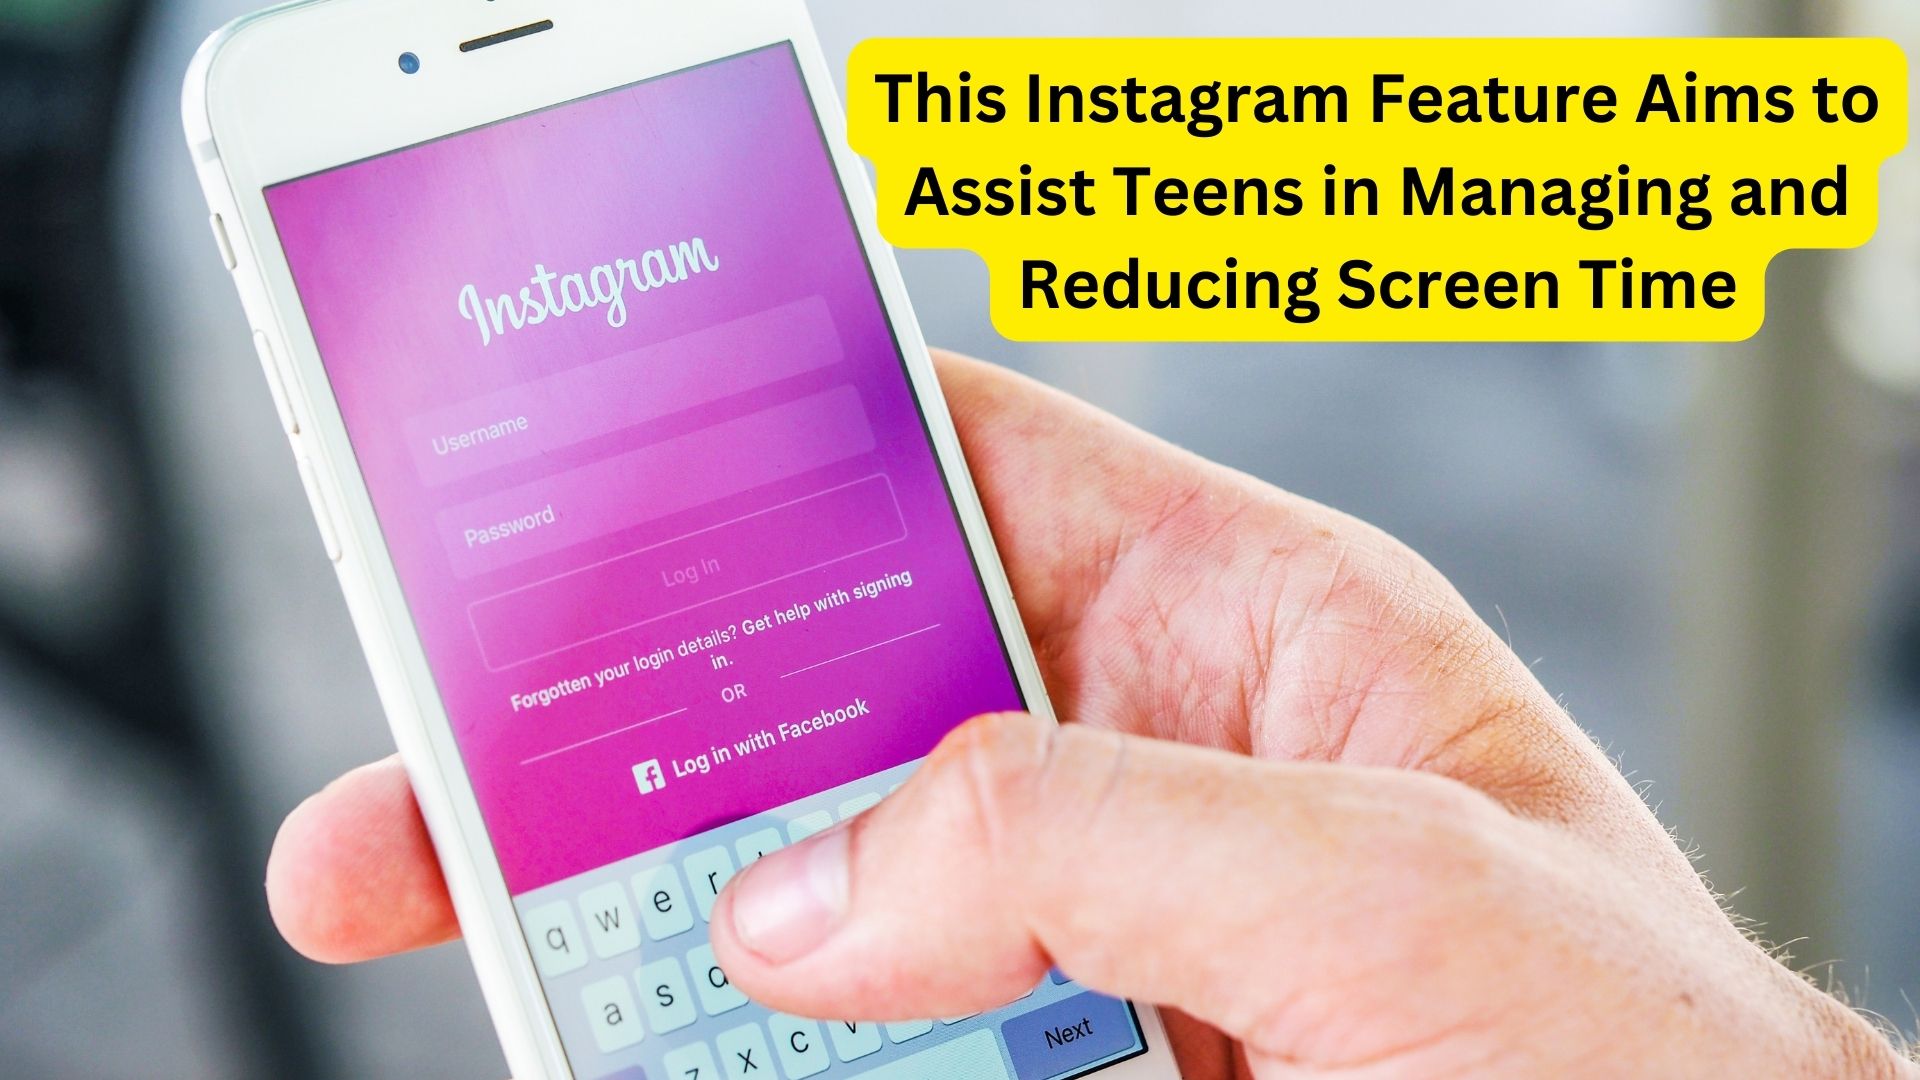 This Instagram Feature Aims to Assist Teens in Managing and Reducing Screen Time